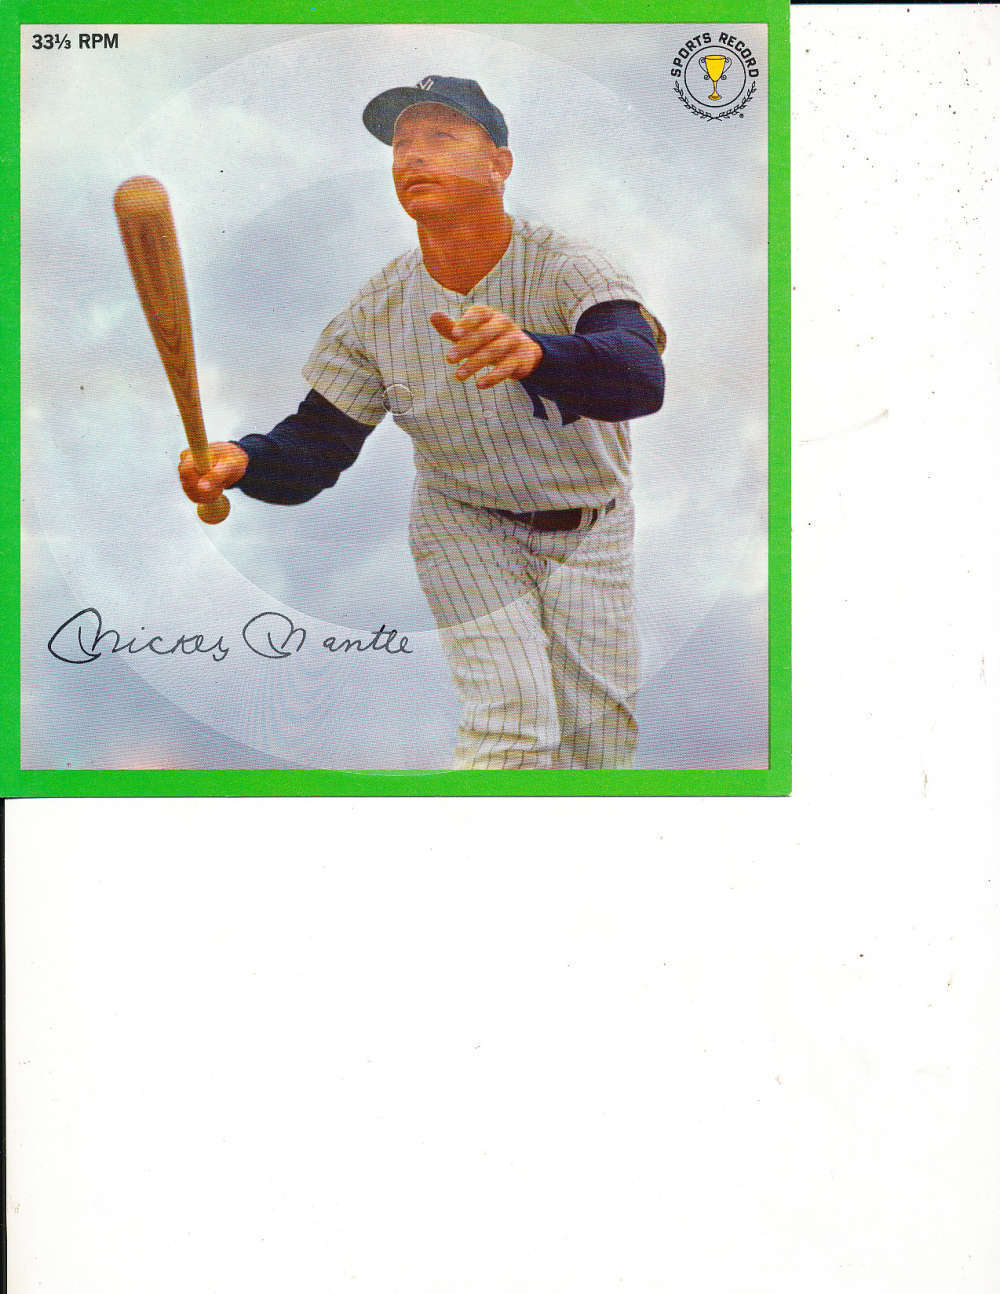 1964 Auravision Mickey Mantle New York Yankees nm card record bx1.a.1